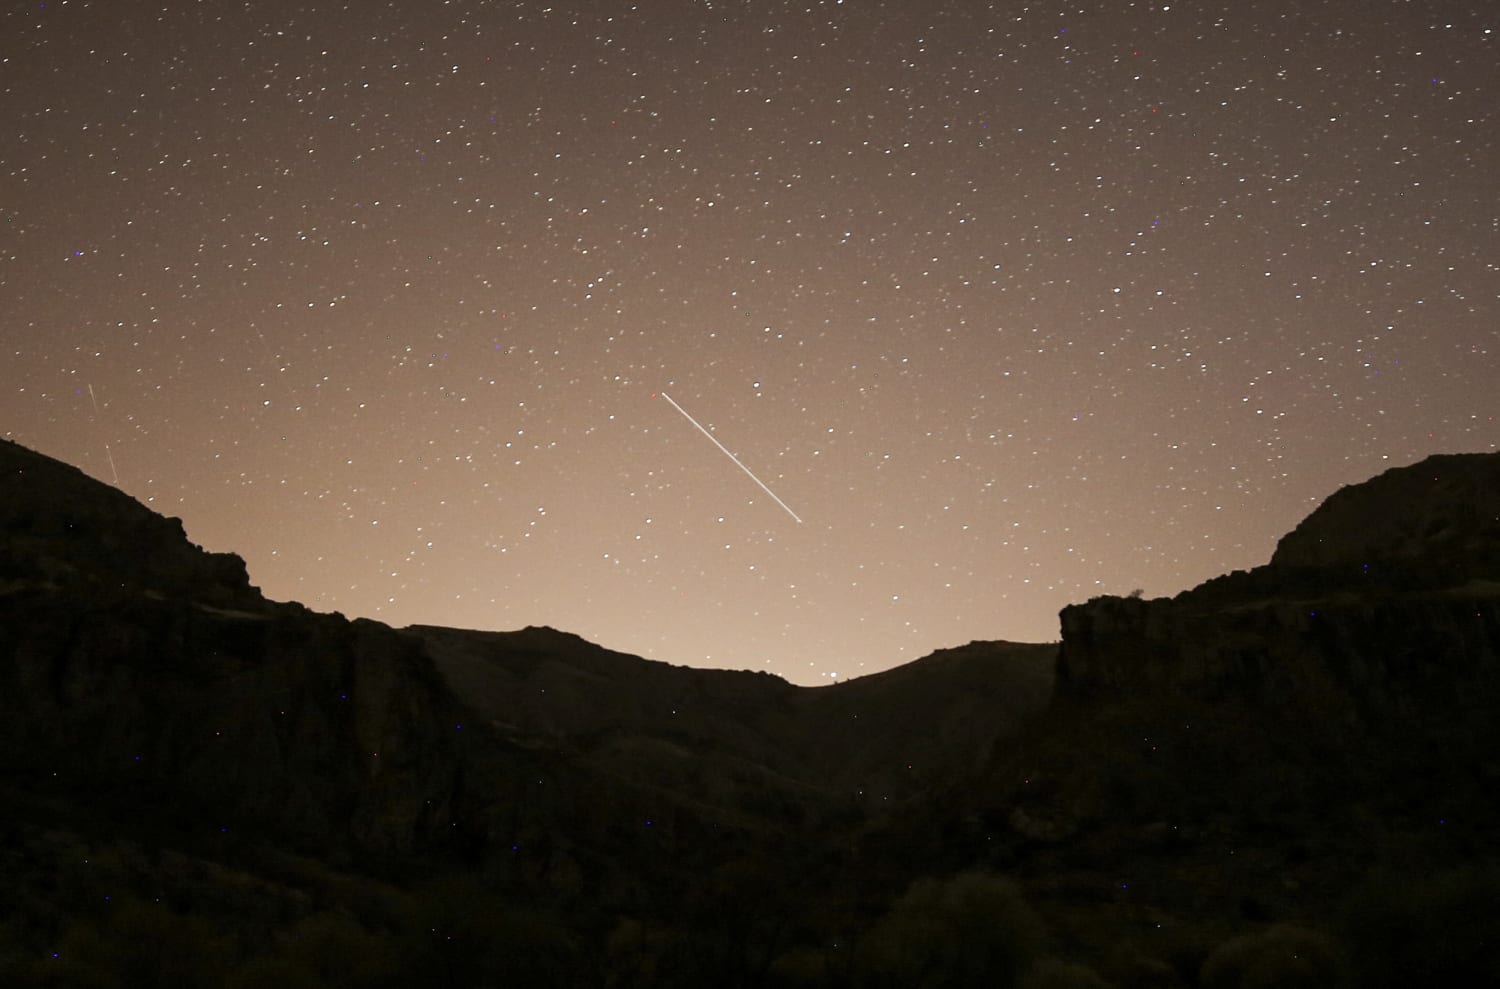 How to see shooting stars